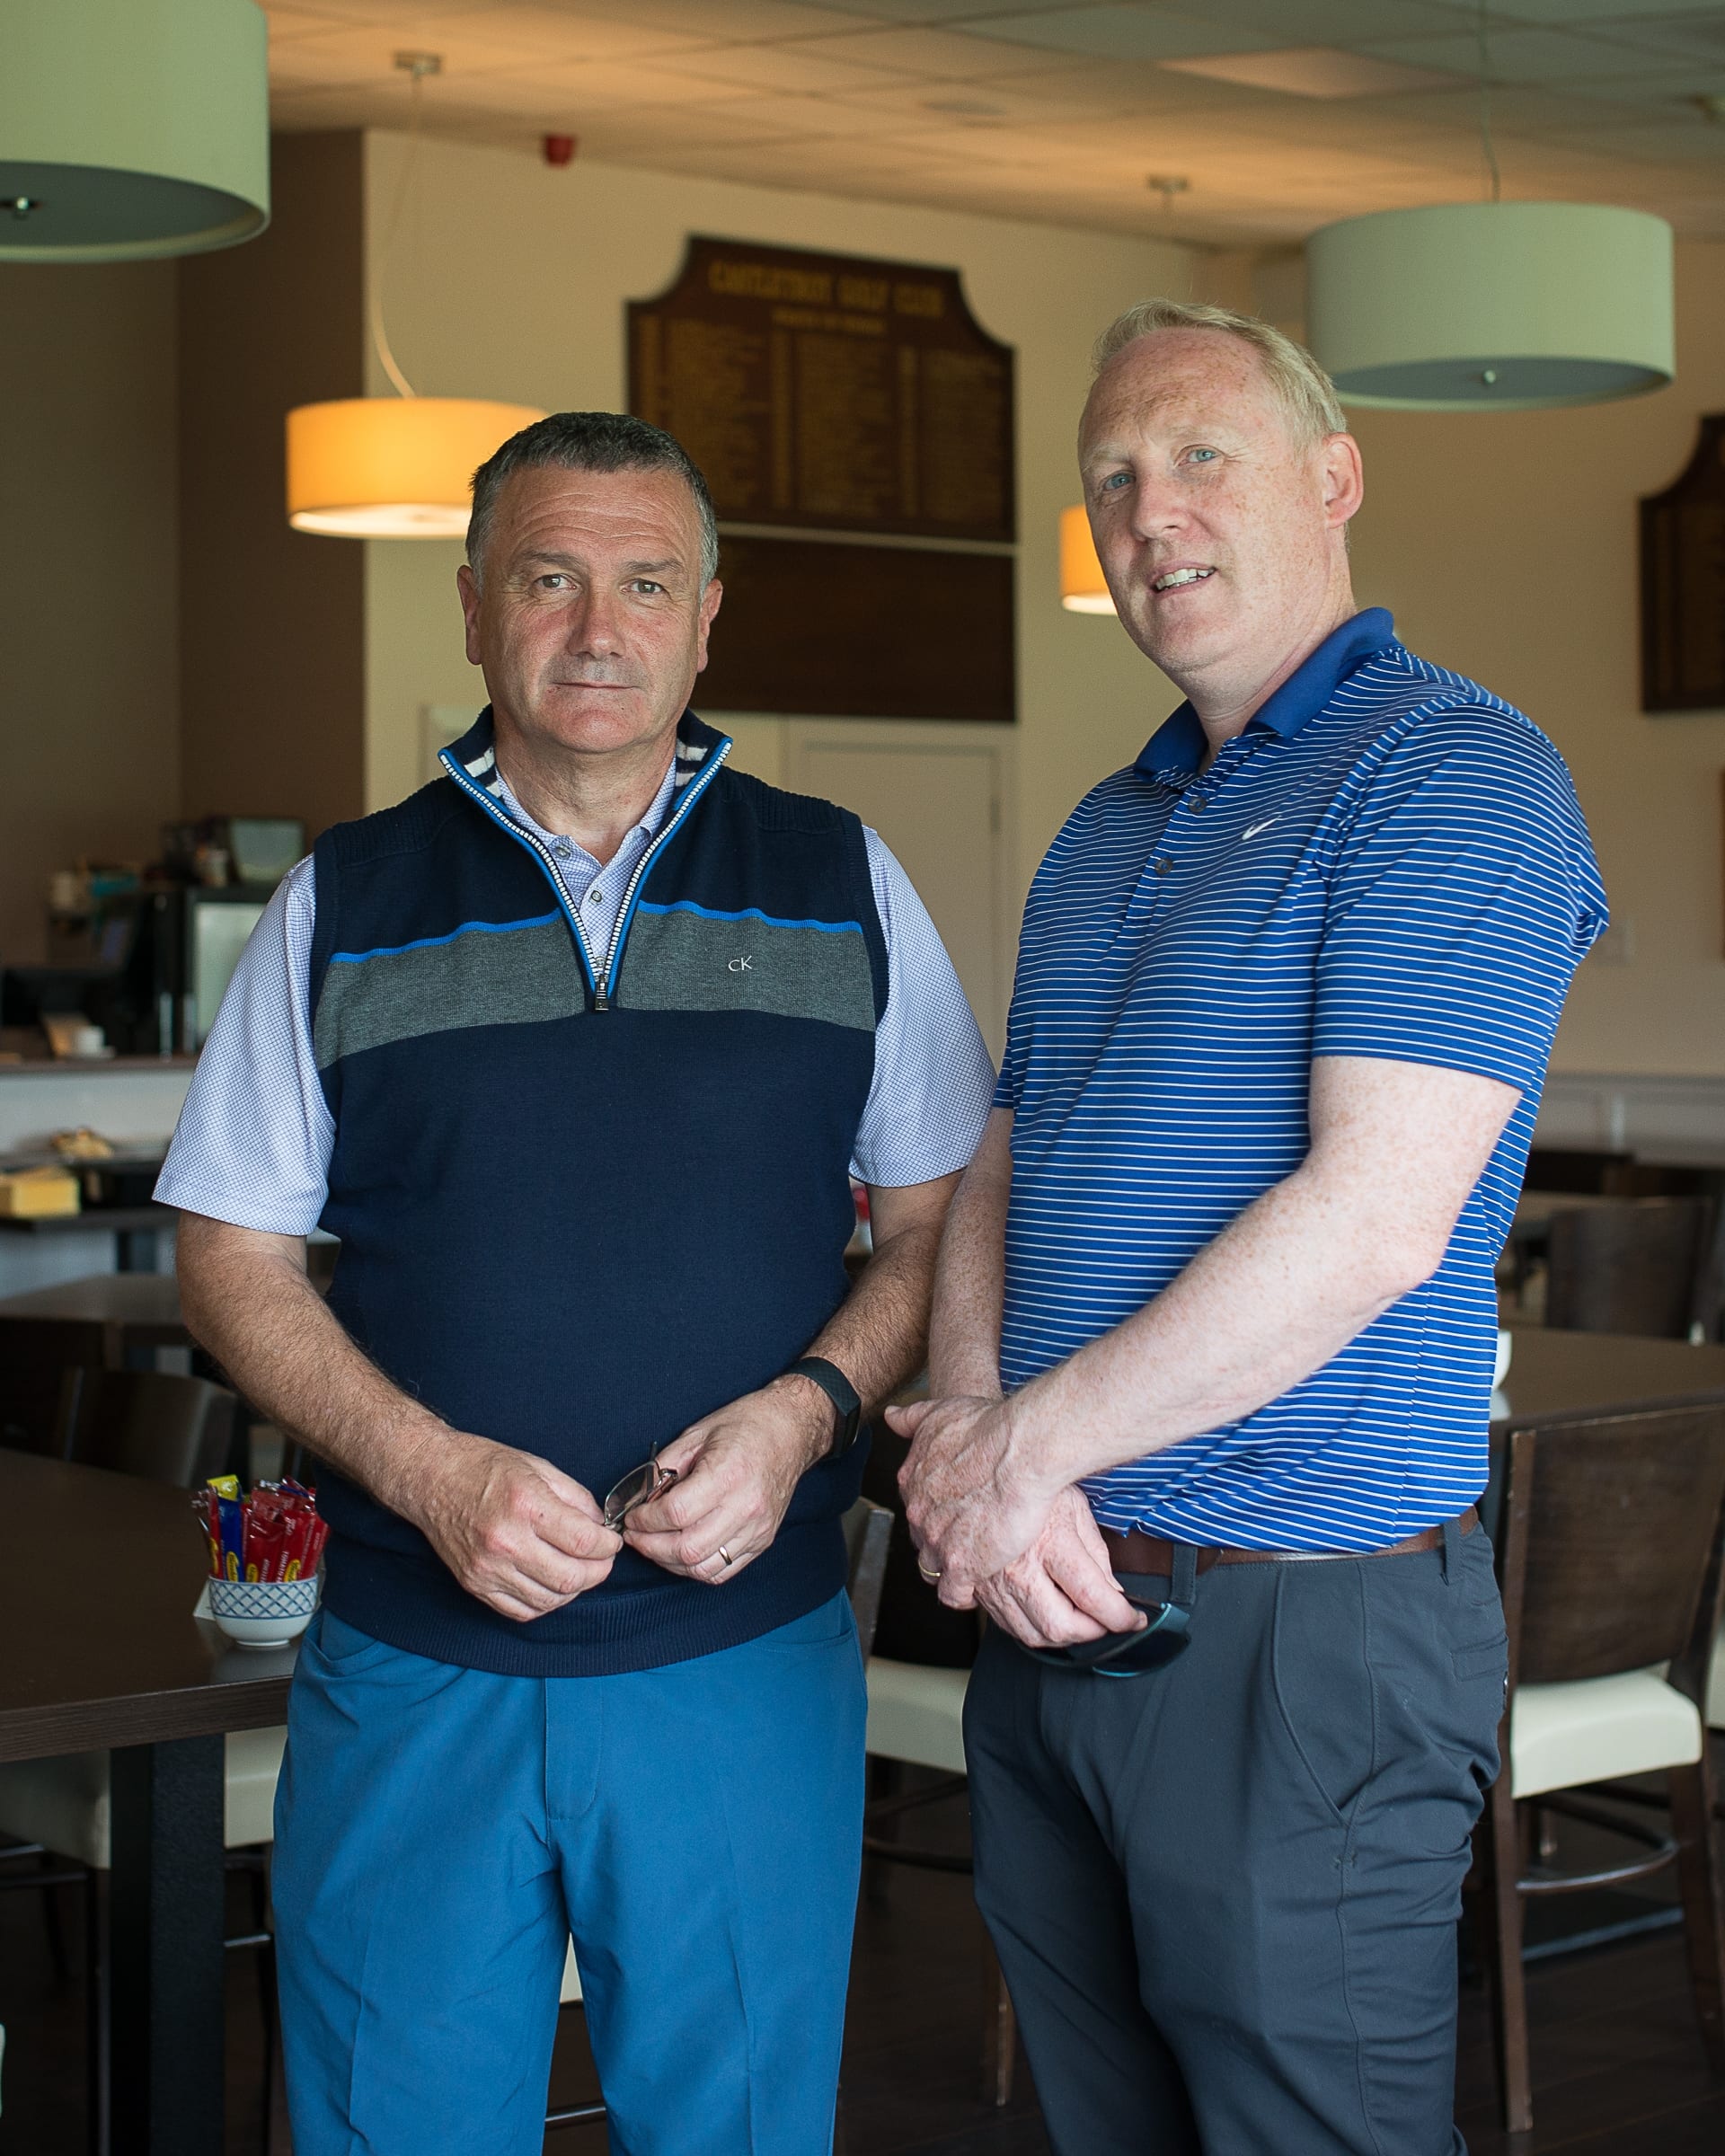 Limerick Chamber together with Castletroy Golf club proudly present: Go Golfing for Business Series, which took place on 17th May in Castletroy Golf Club, Liemrick - from left to right: Pat Fitzgerald- Limerick City and County Council, John Cannon - Green Cross Pharmacy